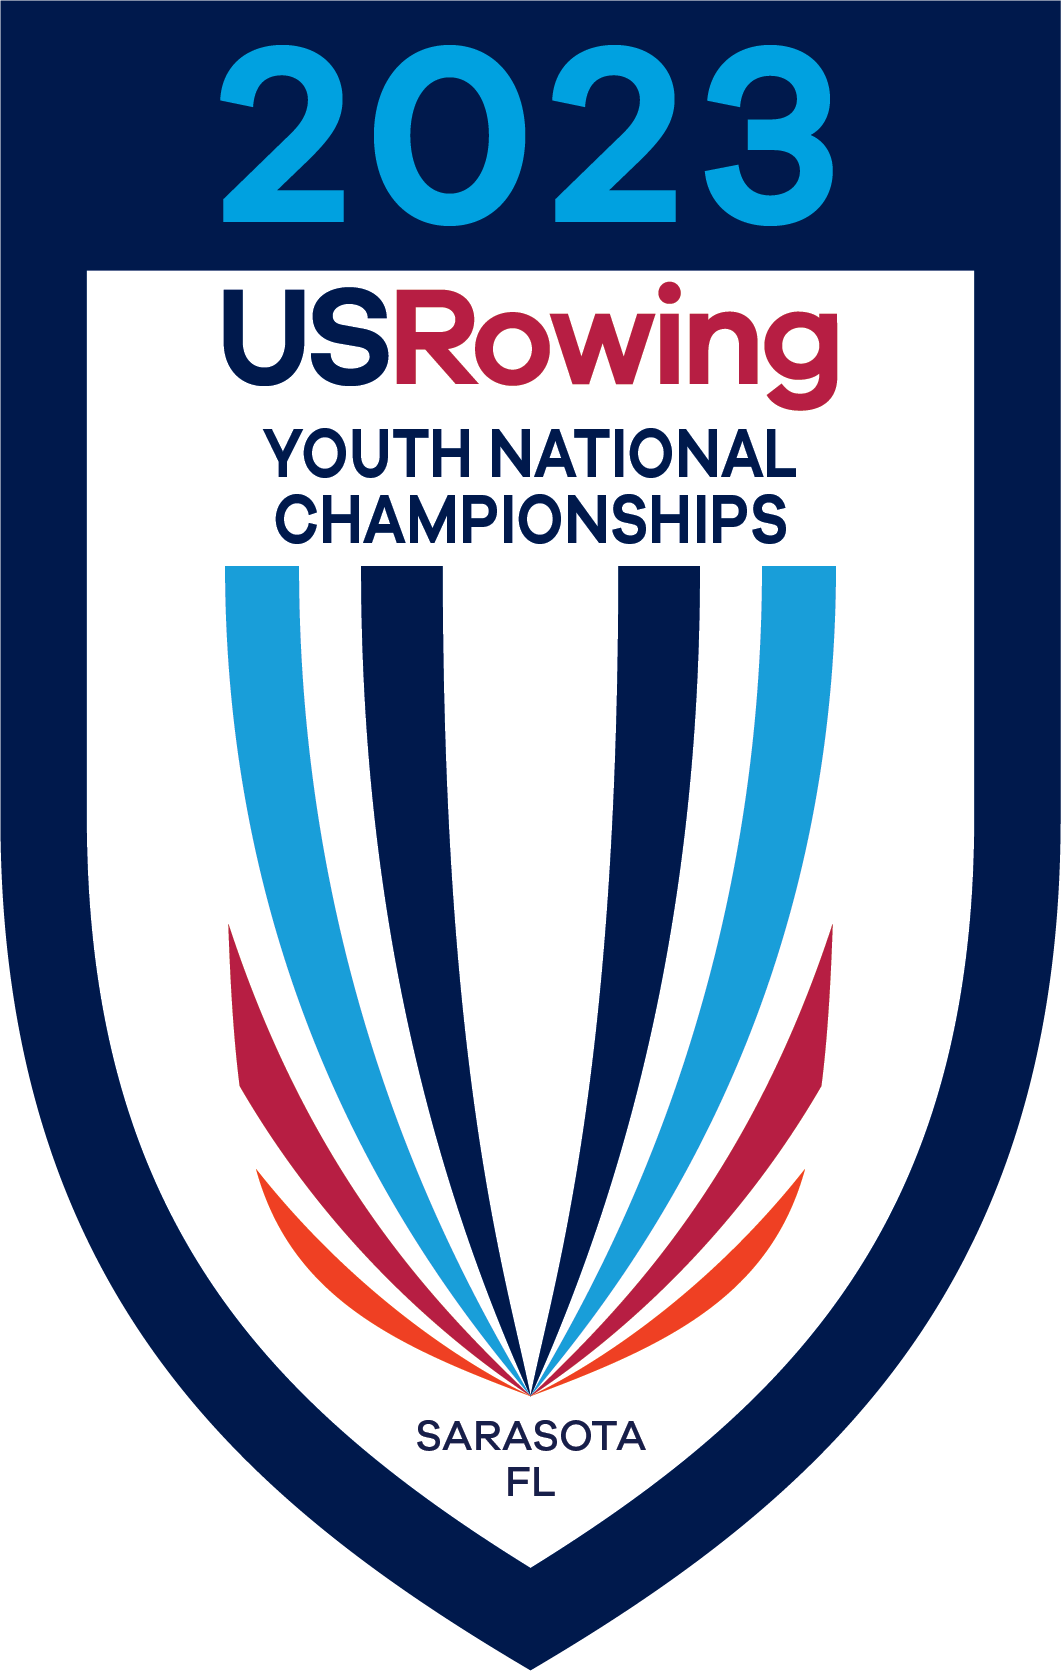 USRowing Youth National Championships Overview